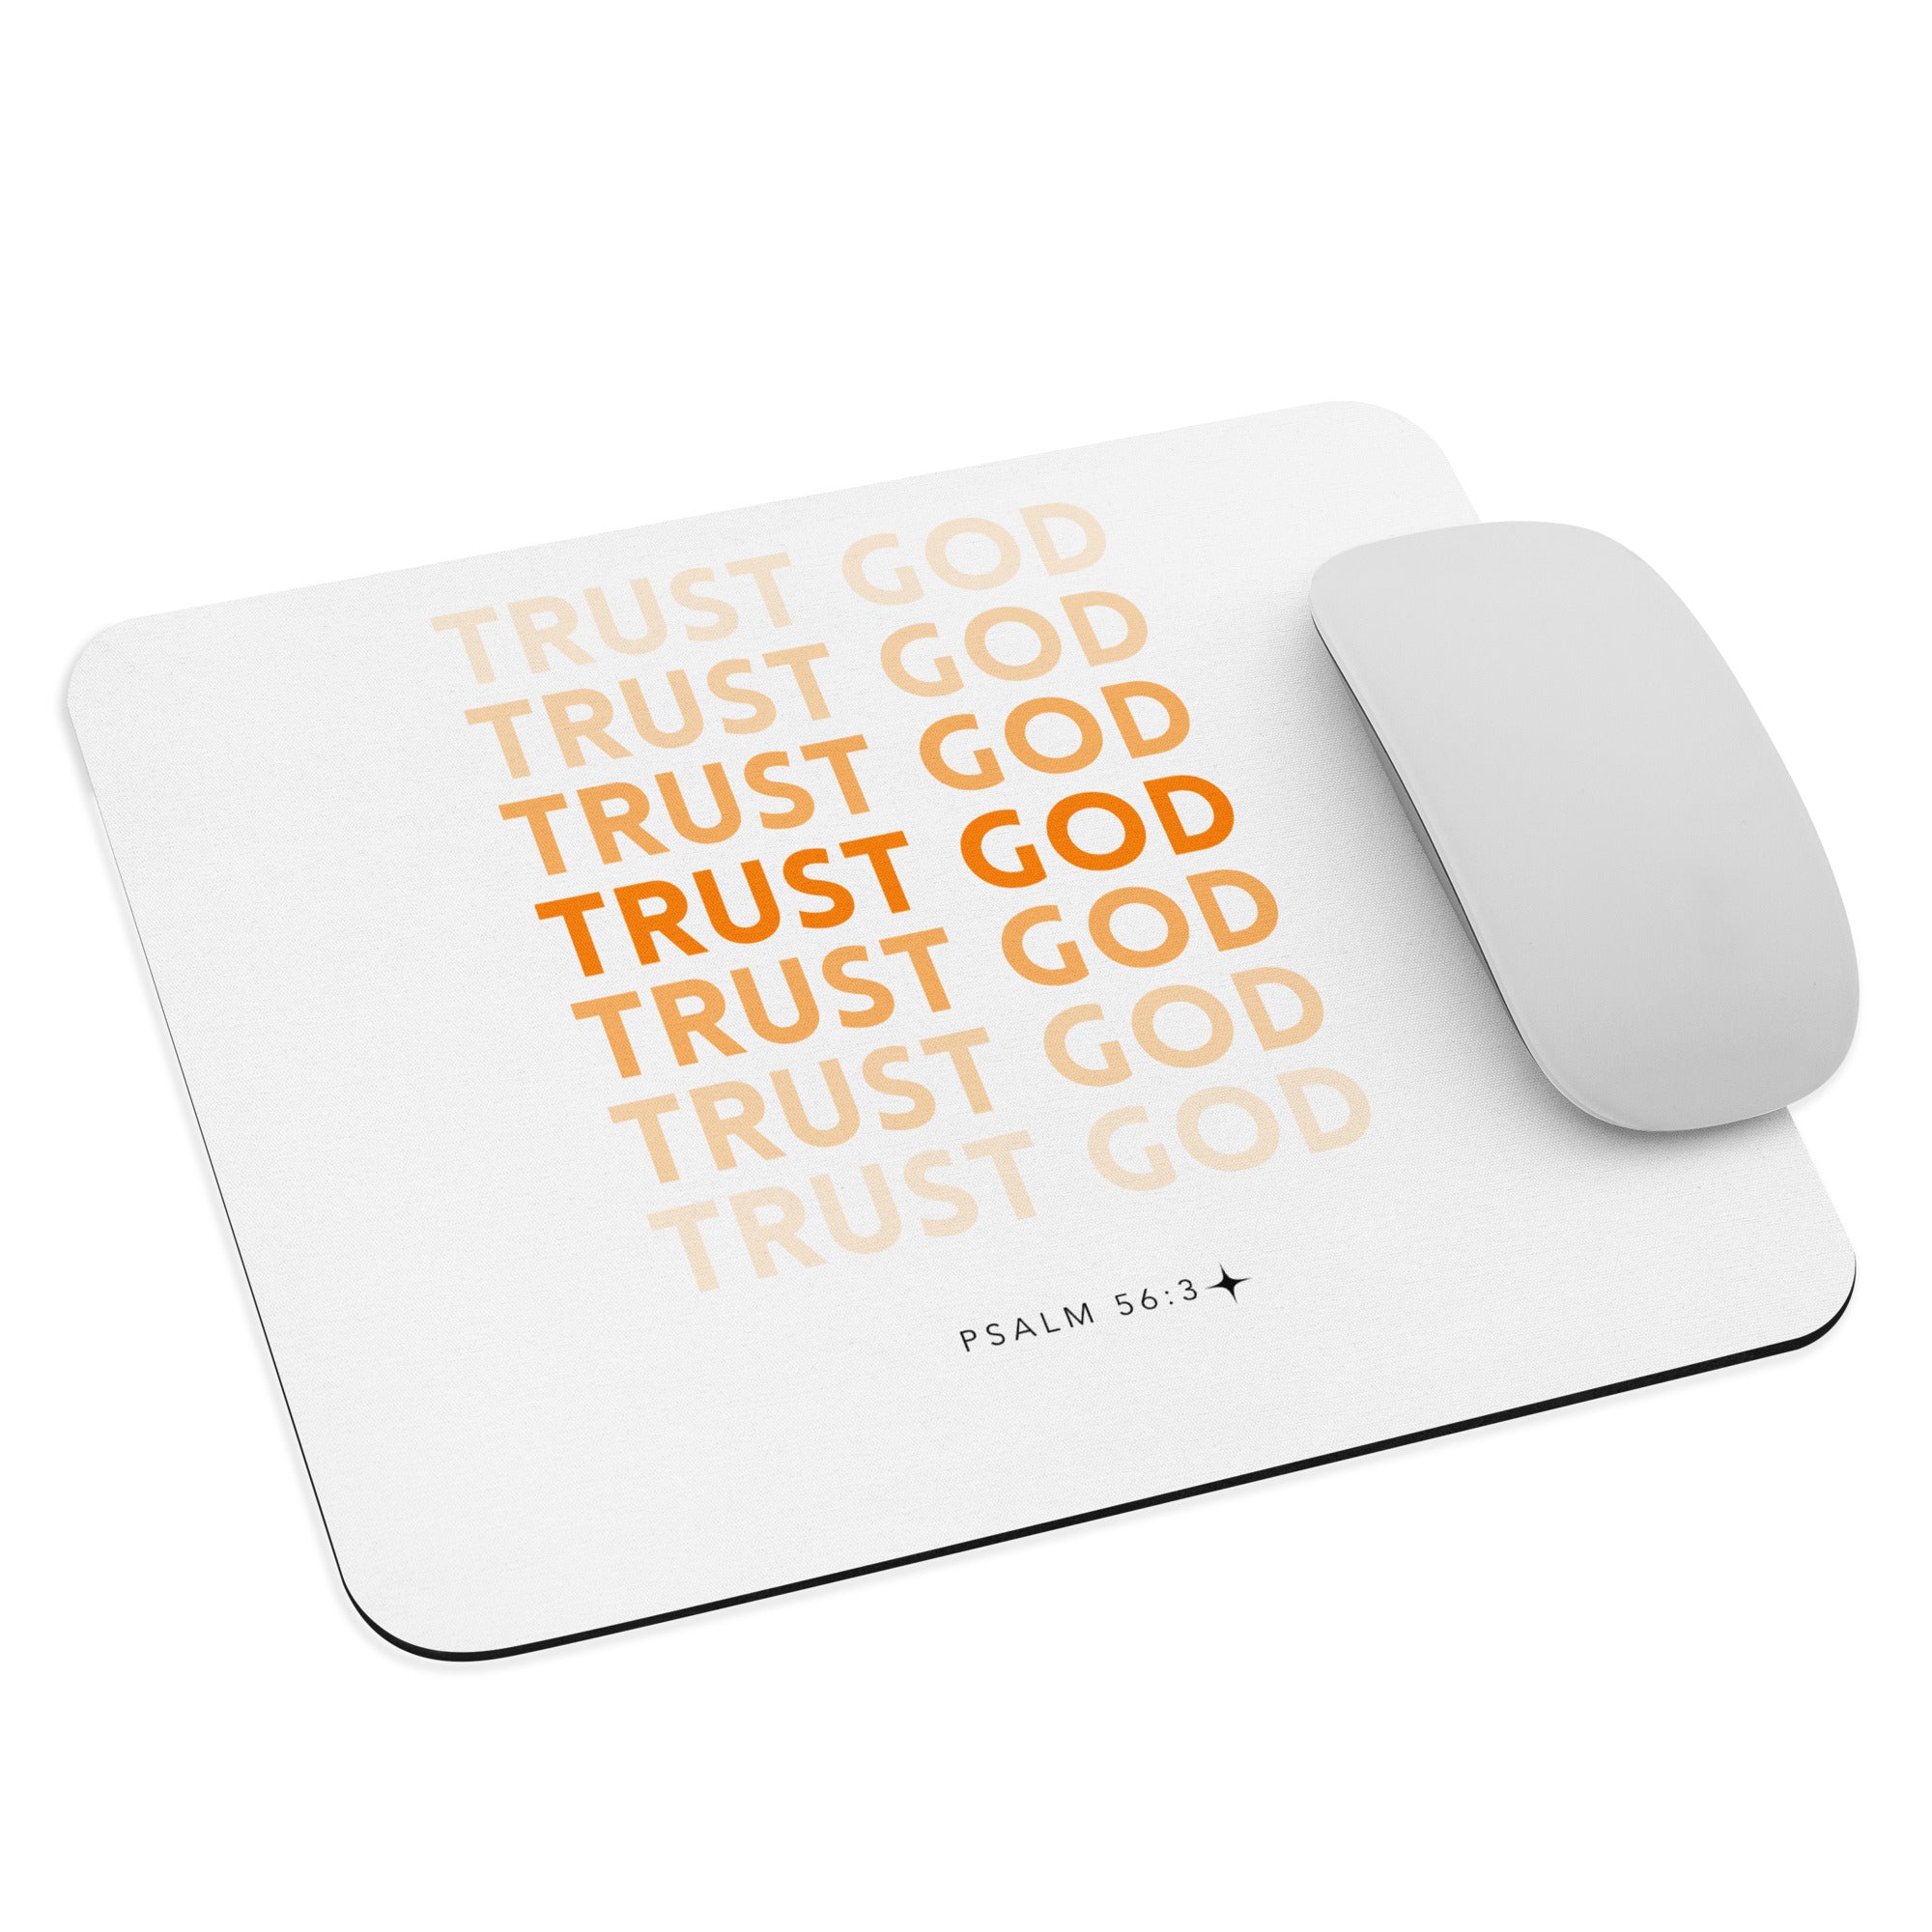 Mouse pad - Psalm 56:3